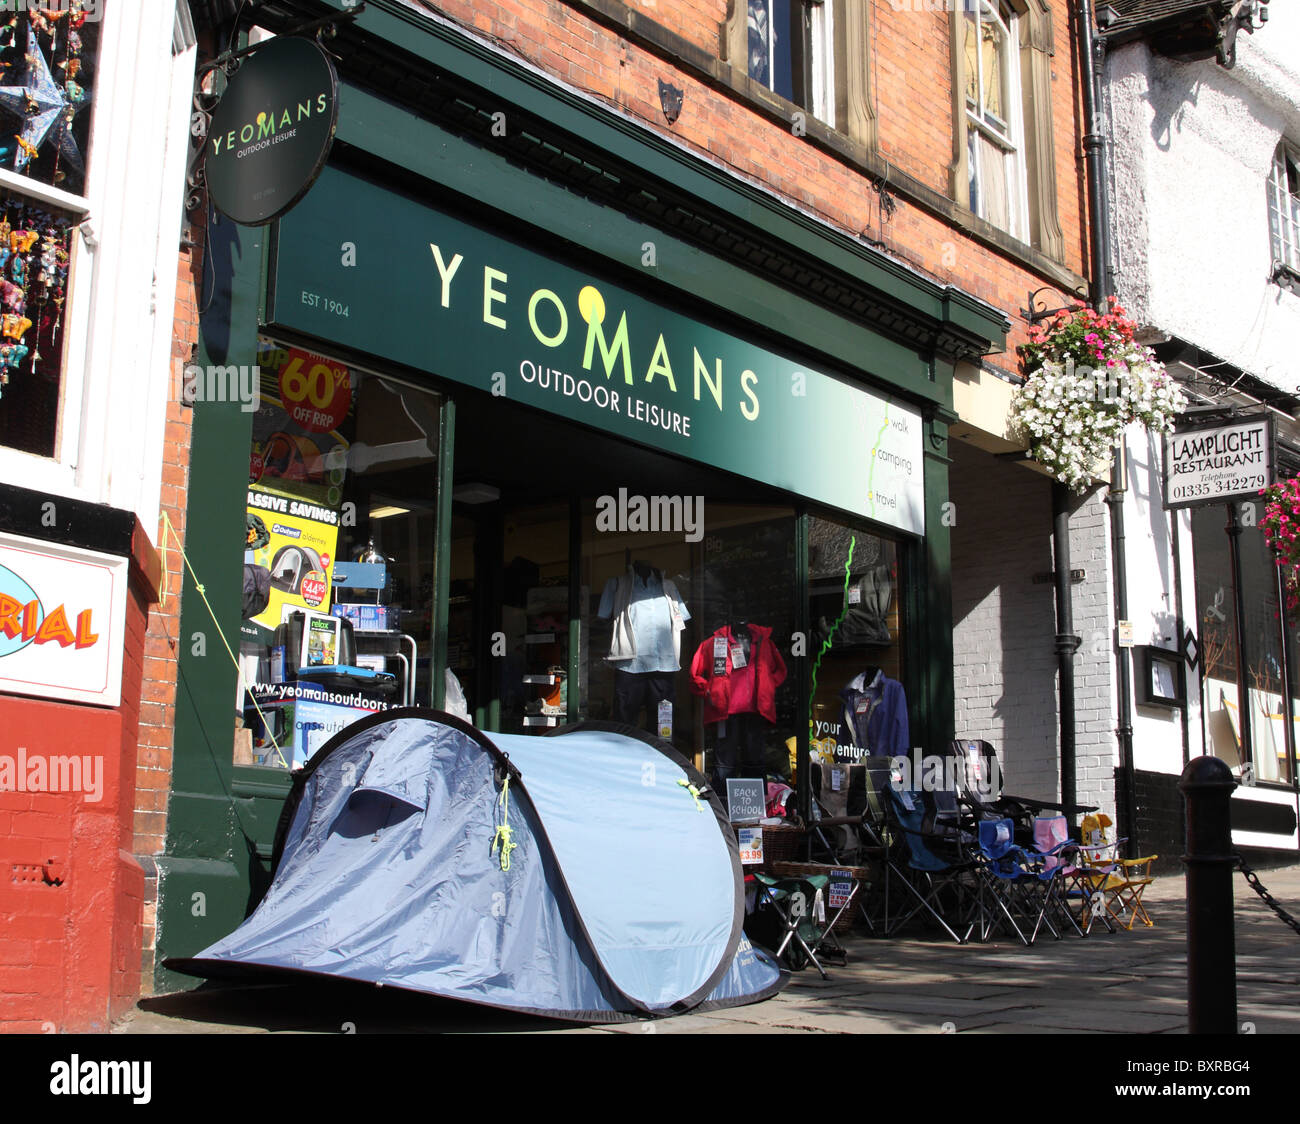 A Yeomans Outdoor Leisure store in the U.K. Stock Photo